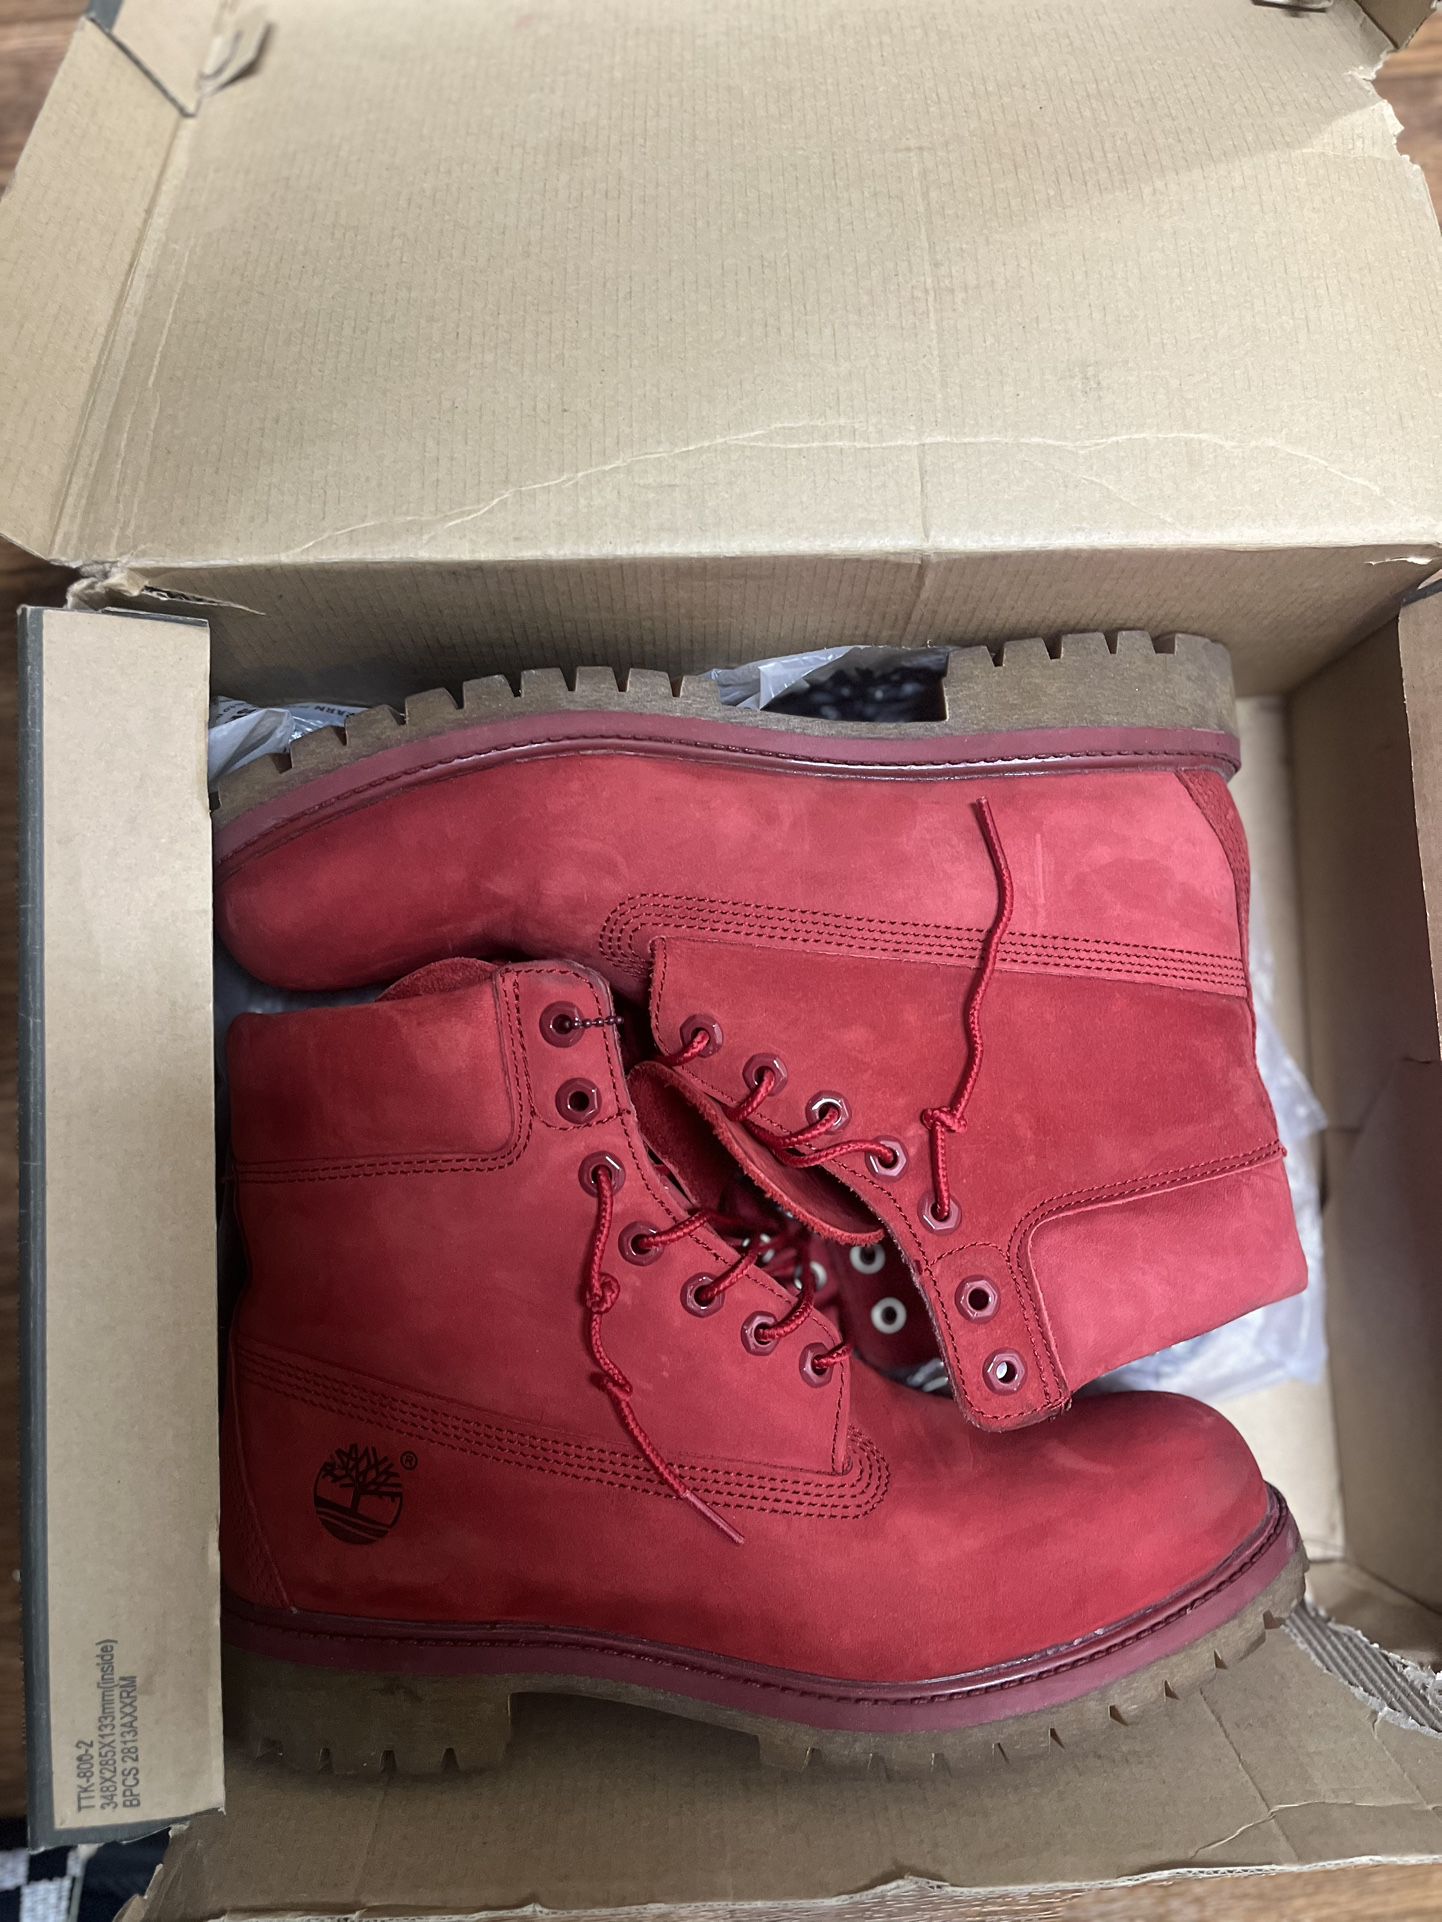 Timberland “Spicy Reds” Size 10 